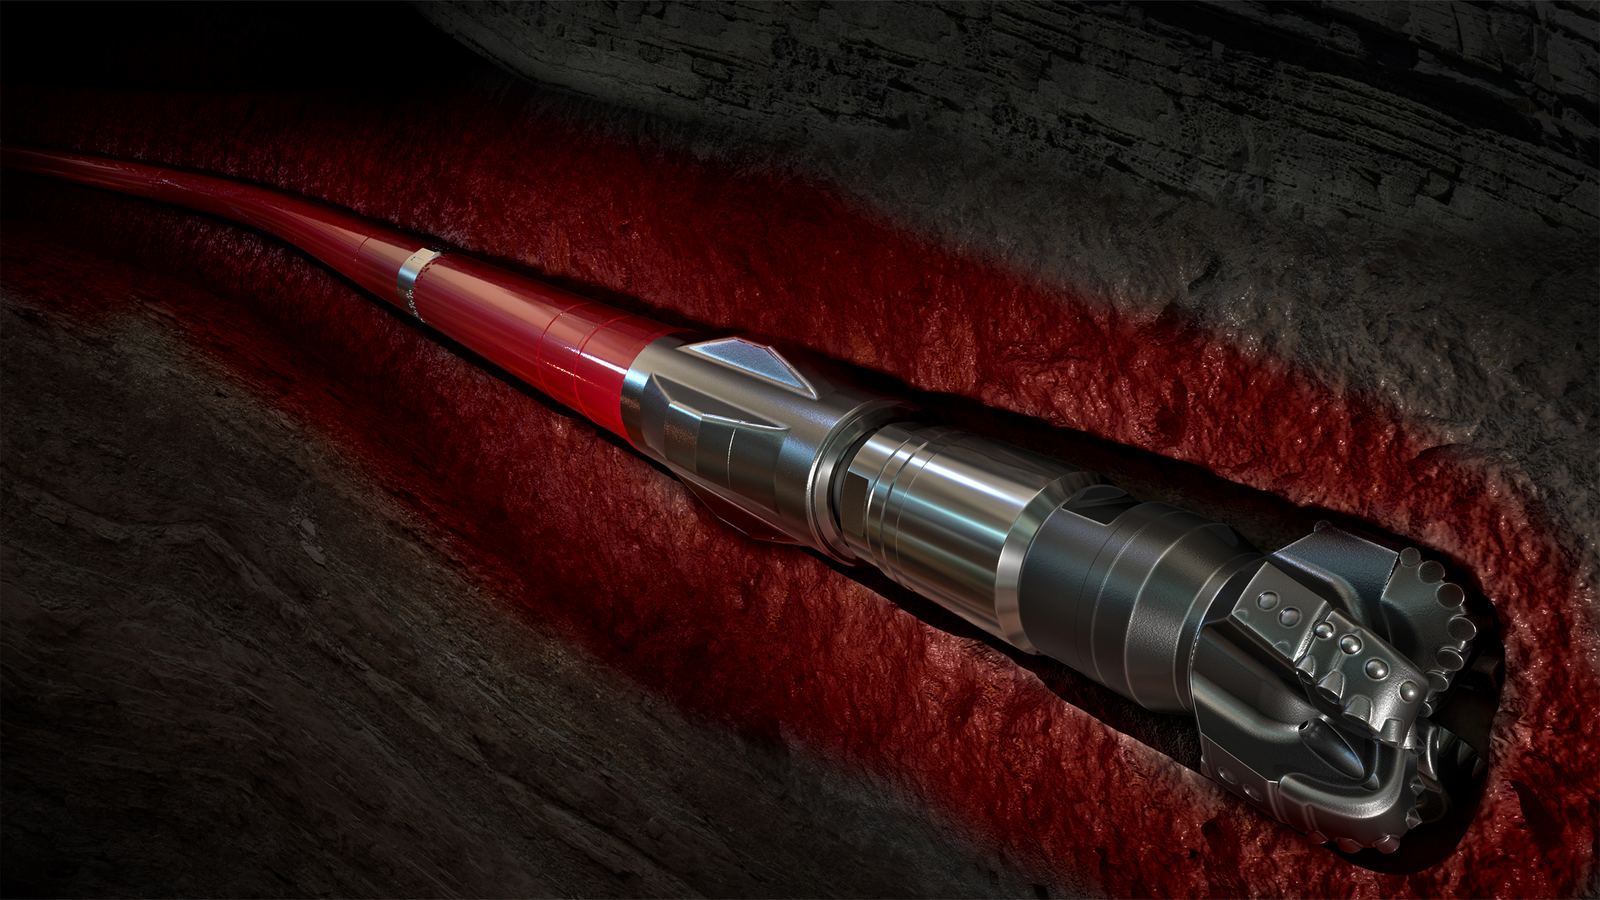 Nano-1 strengthens wellbore integrity, extending drilling time and efficiency